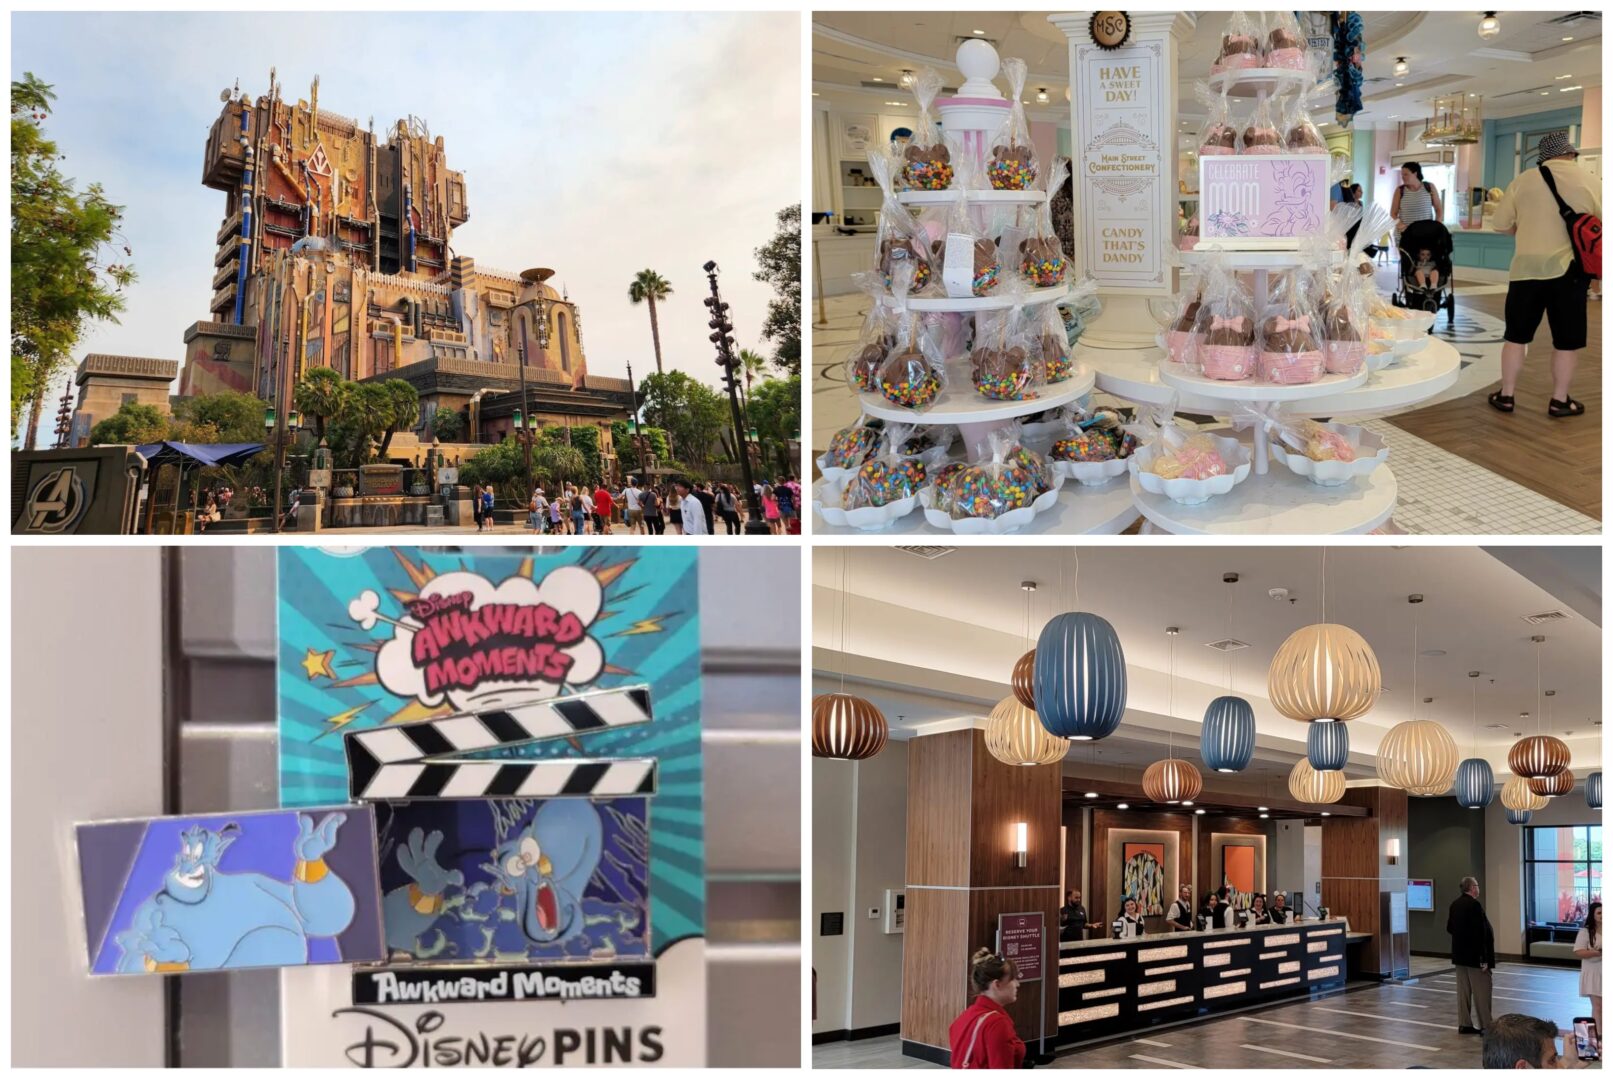 Disney News Highlights: Mother’s Day at Disney World, Two Resort Tours, Chris Pratt Pranks Guests at Disneyland, New Vera Bradley Winnie-The-Pooh Collection at Springs